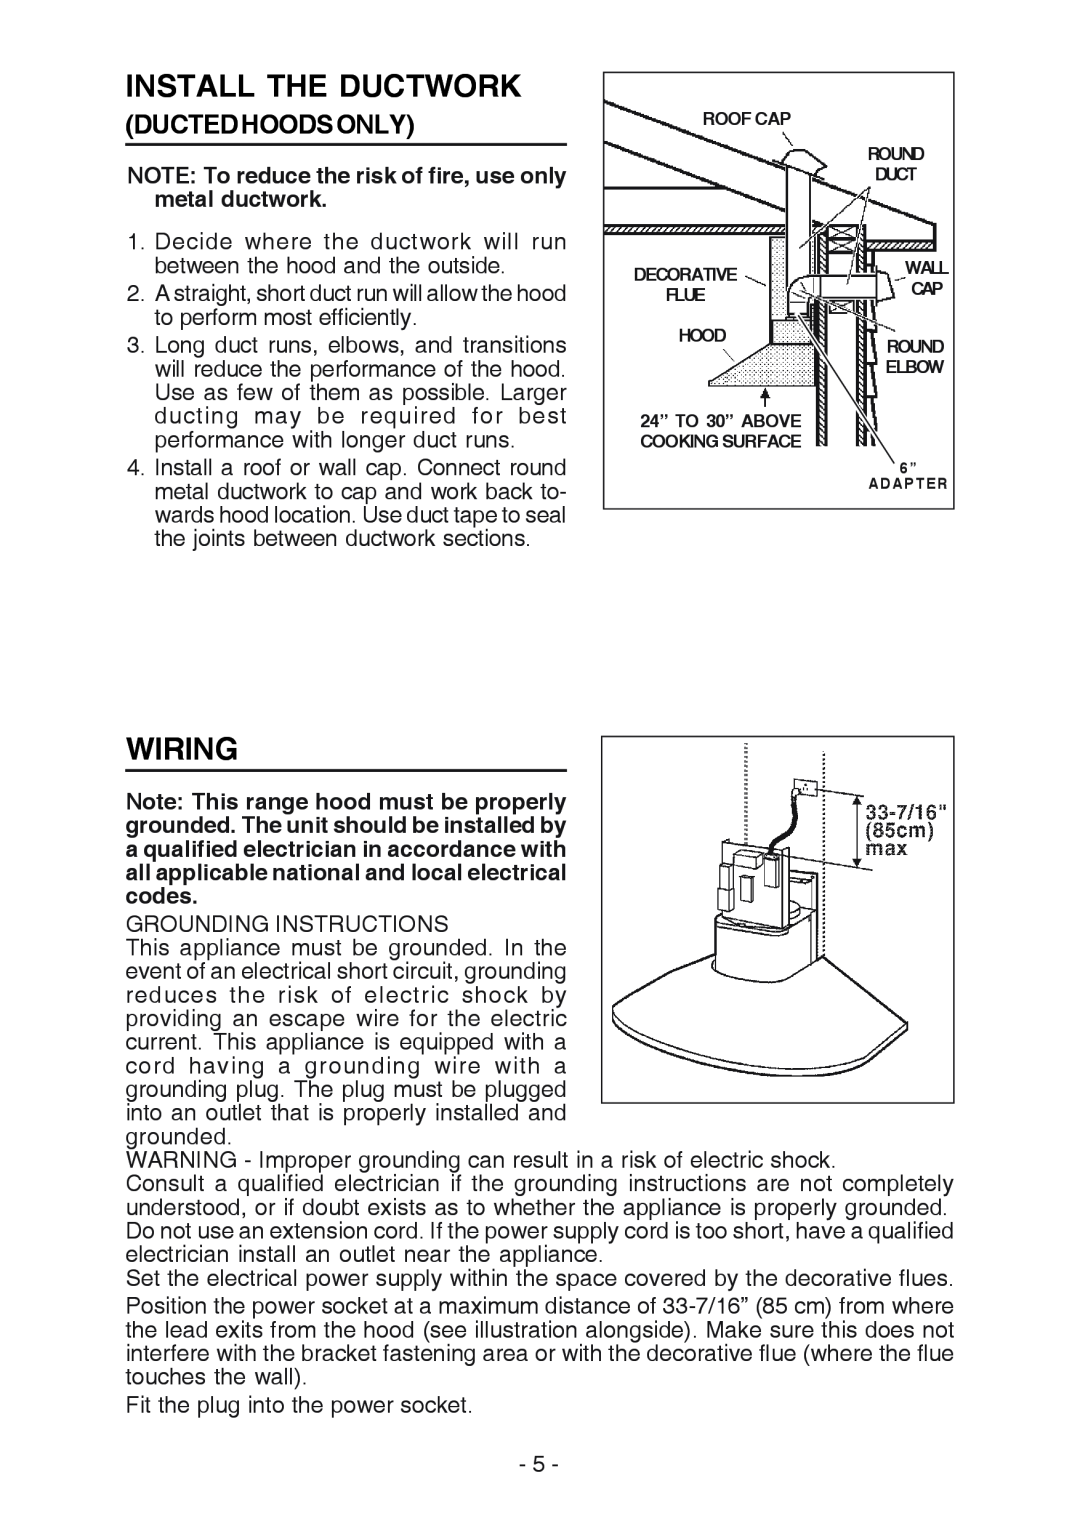 Broan RM519004 Install The Ductwork, Wiring, Ductedhoodsonly, NOTE To reduce the risk of fire, use only metal ductwork 